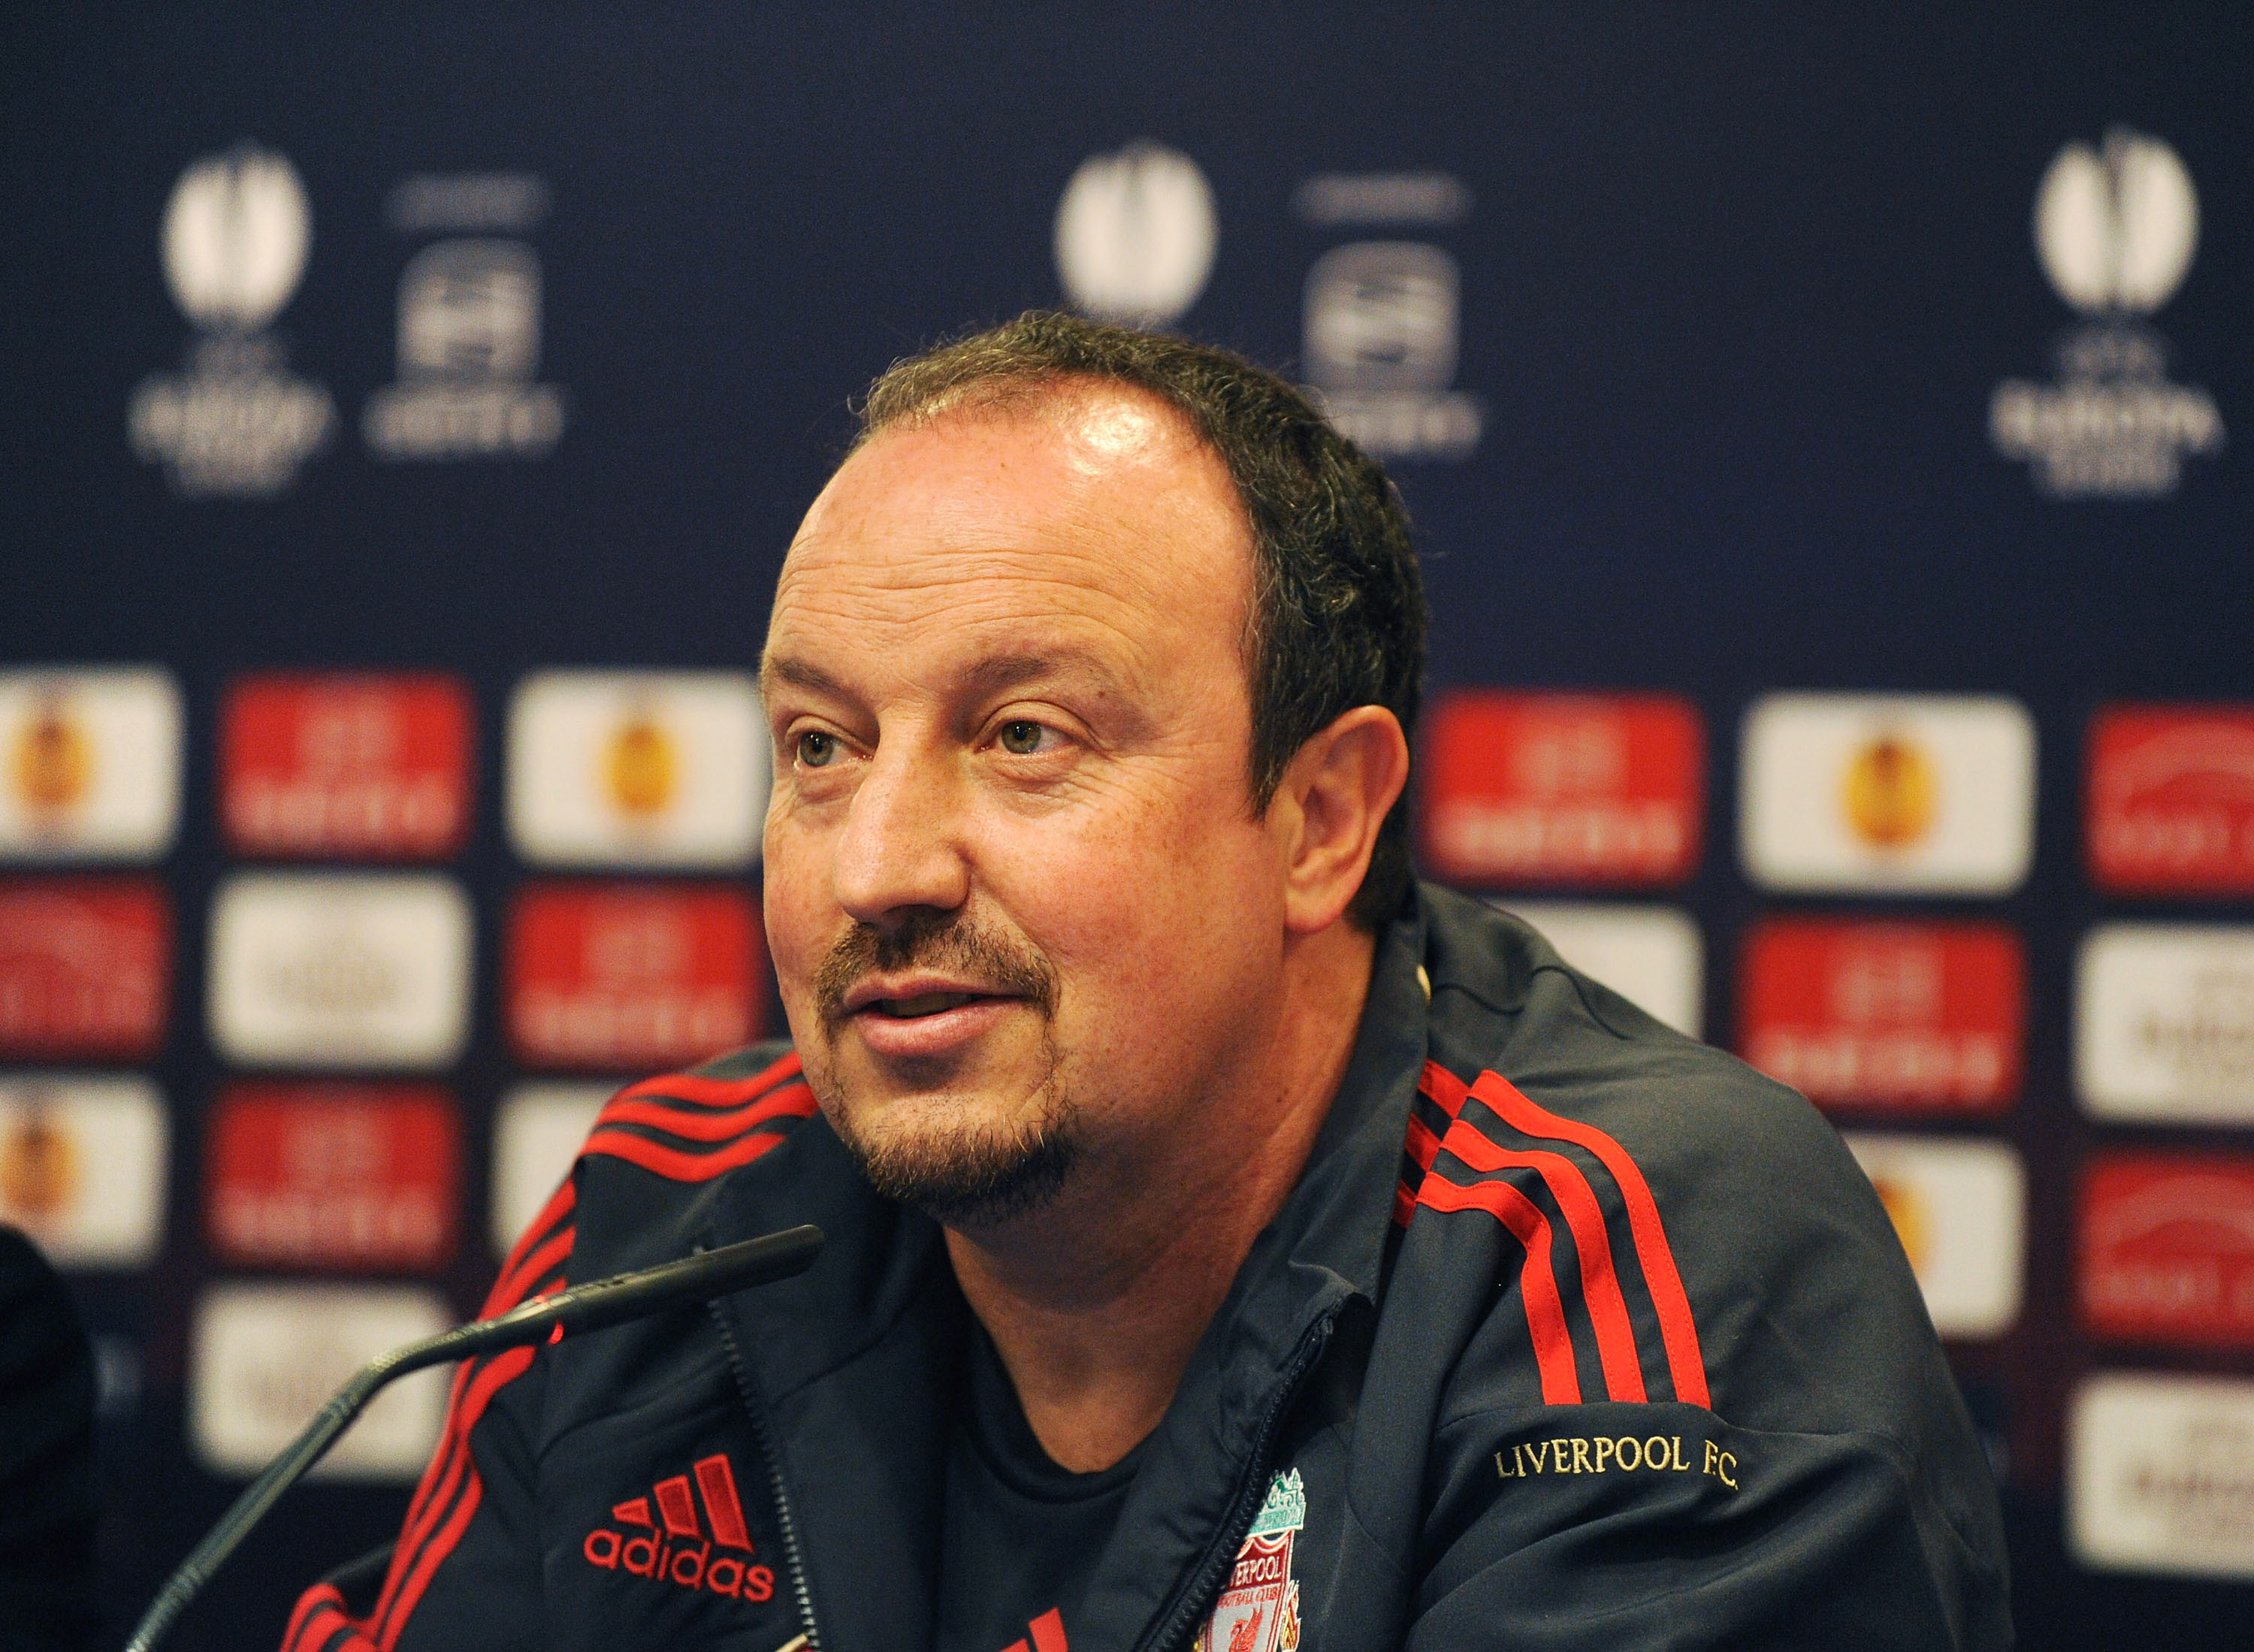 MADRID, SPAIN - APRIL 21:  Liverpool manager Rafa Benitez answers a question during the team press conference at the Vicente Calderon stadium on April 21, 2010 in Madrid, Spain. Liverpool play Atletico Madrid April 22 in the UEFA Europa League semi-finals